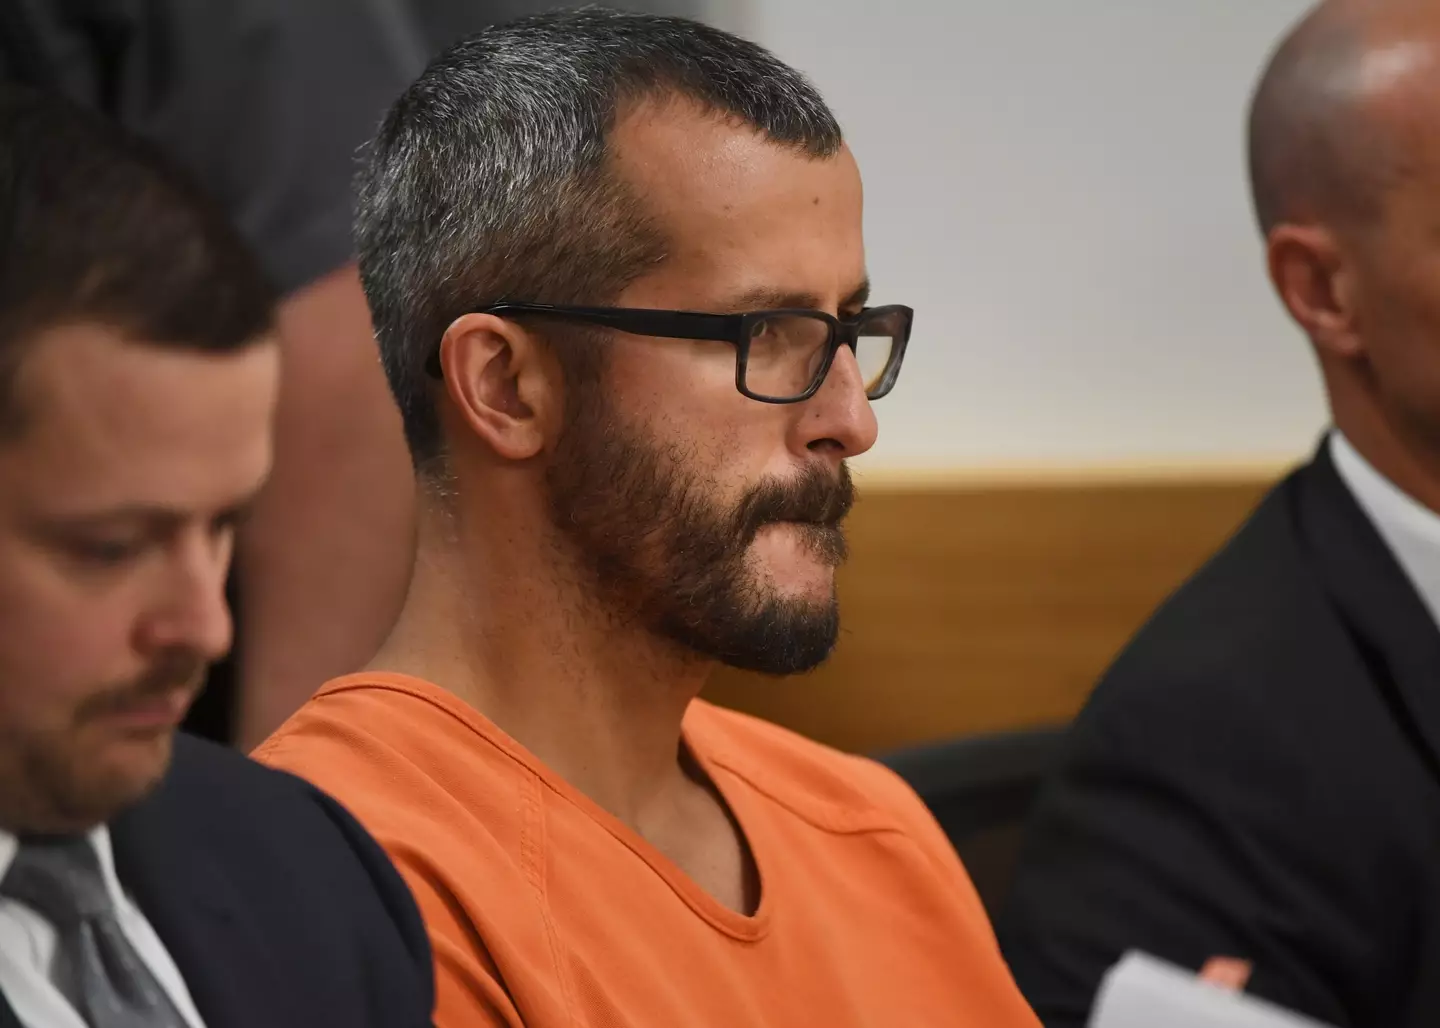 Chris Watts murdered his wife and children in 2018.